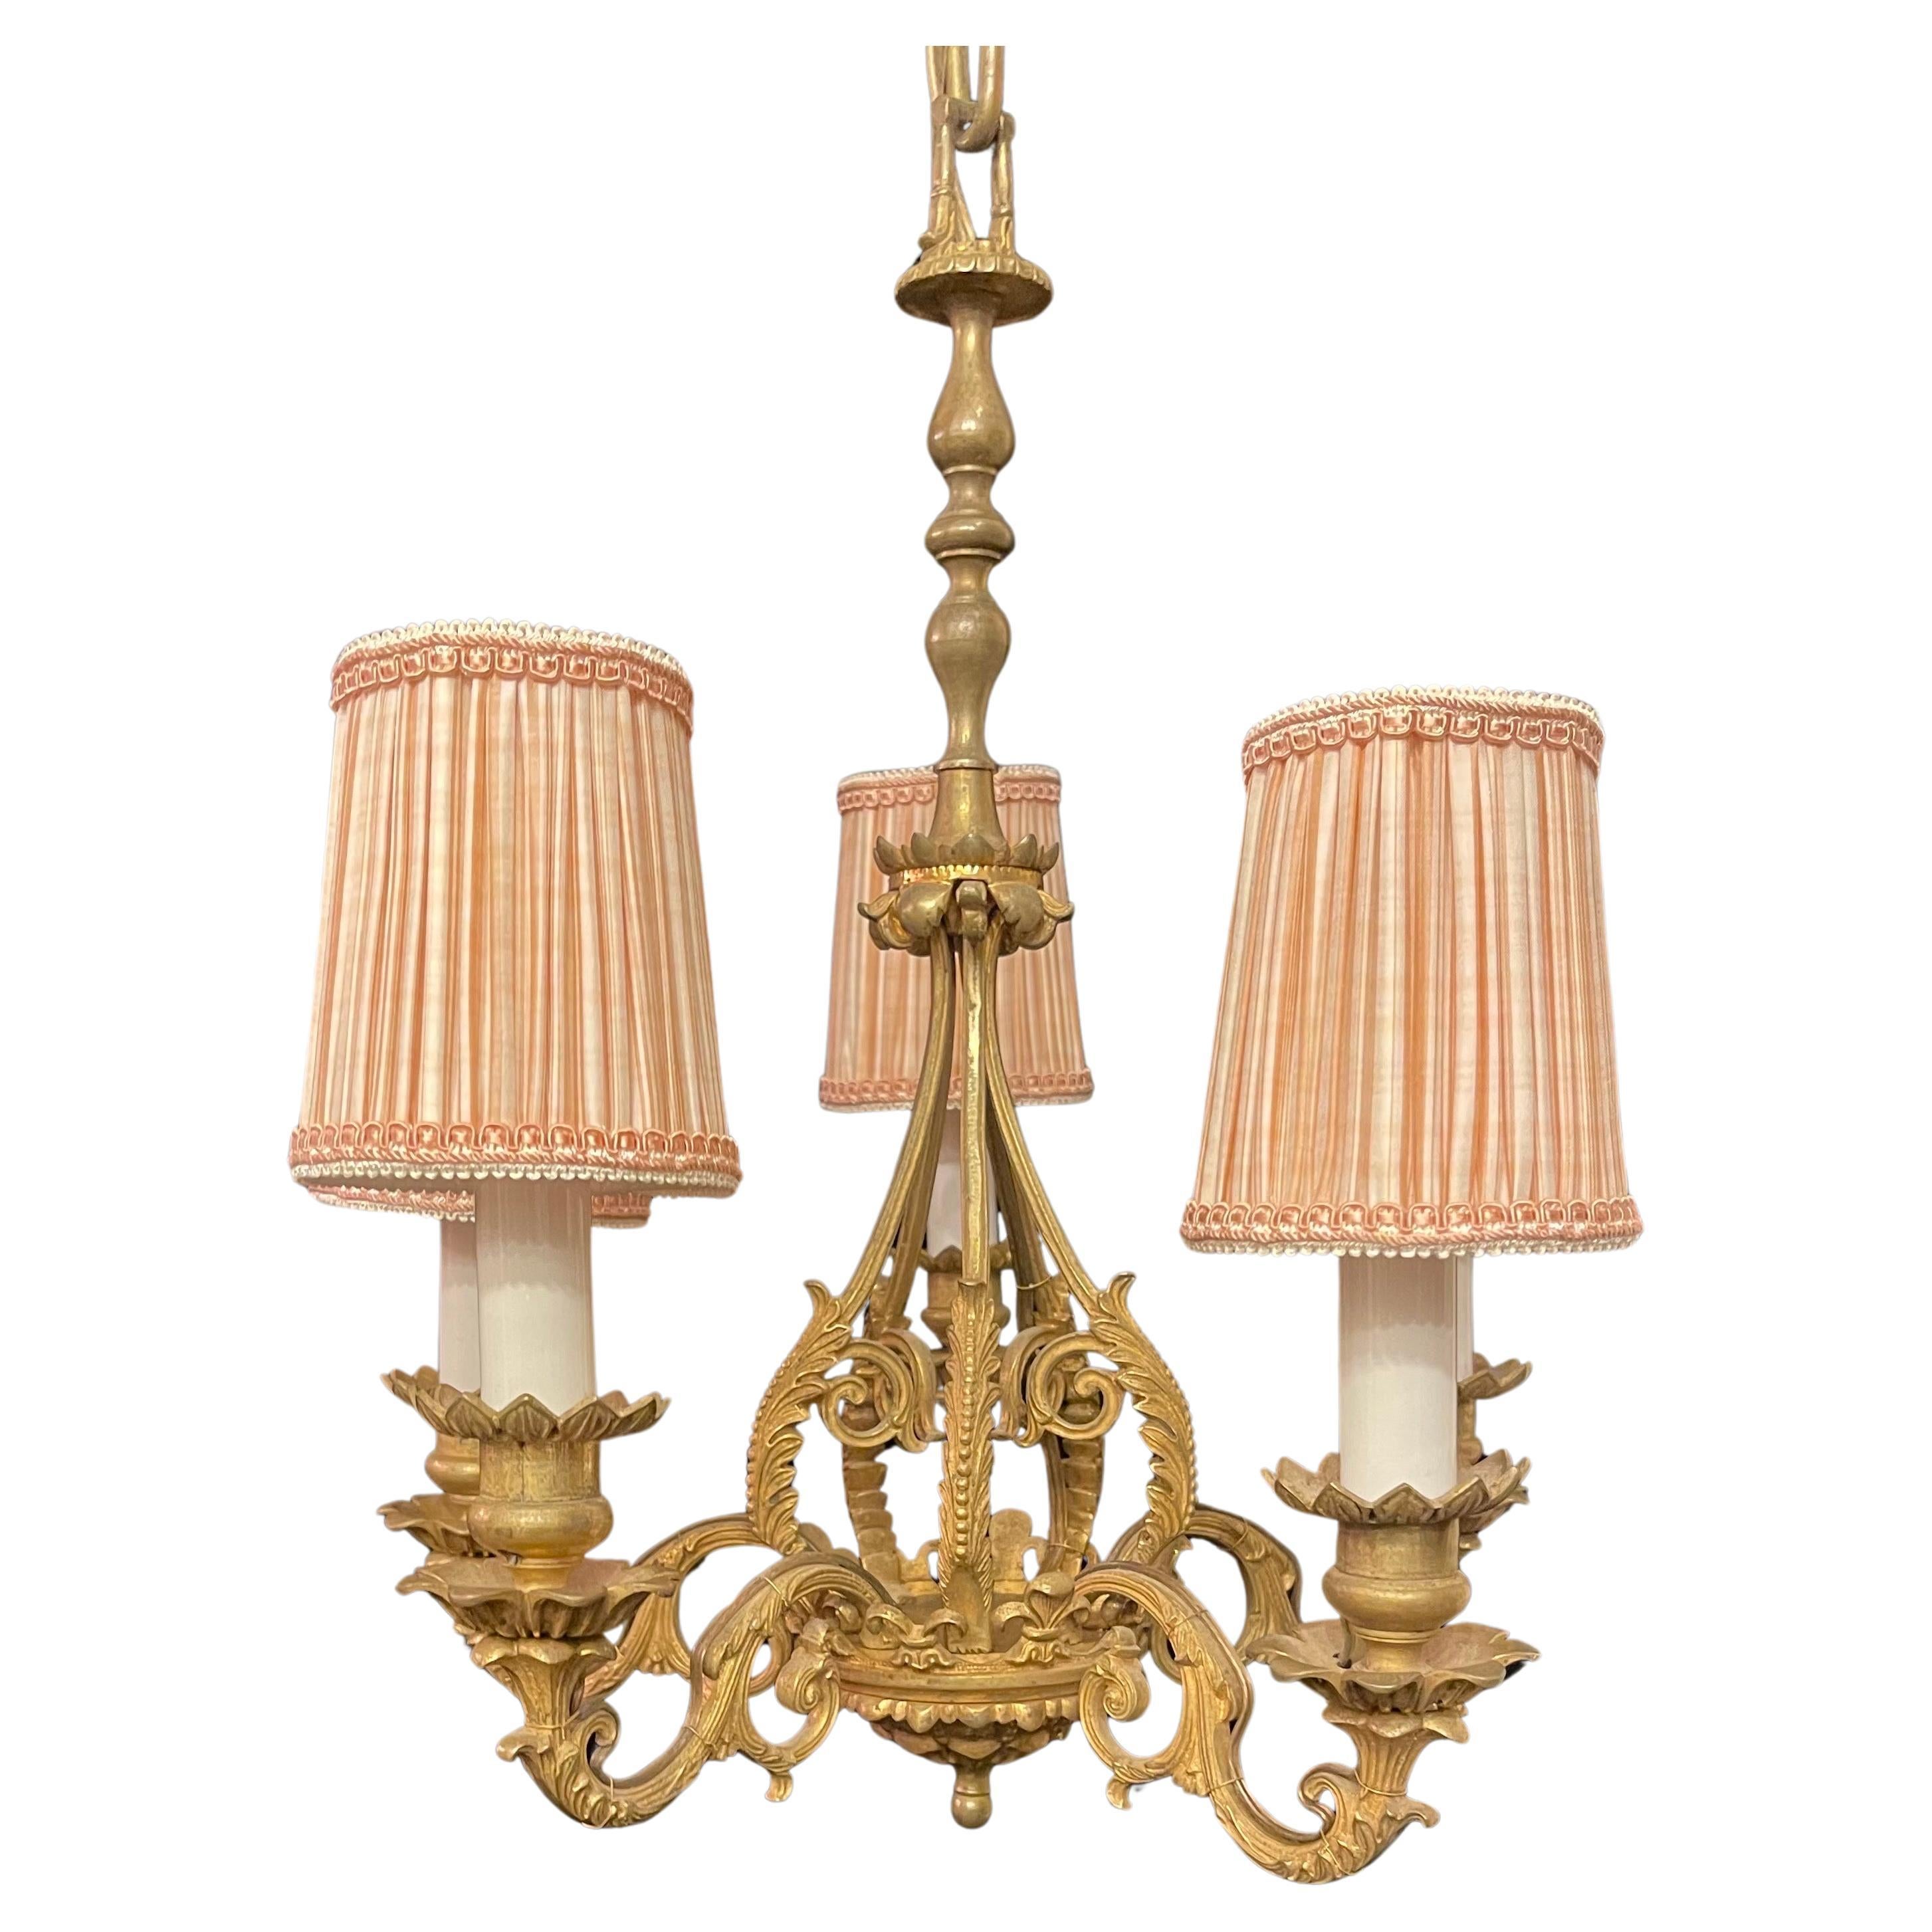 A Wonderful French Empire Dore Bronze Regency Petite Five Candelabra Light Chandelier, This Fixture Comes With Shades That Maybe Removed 